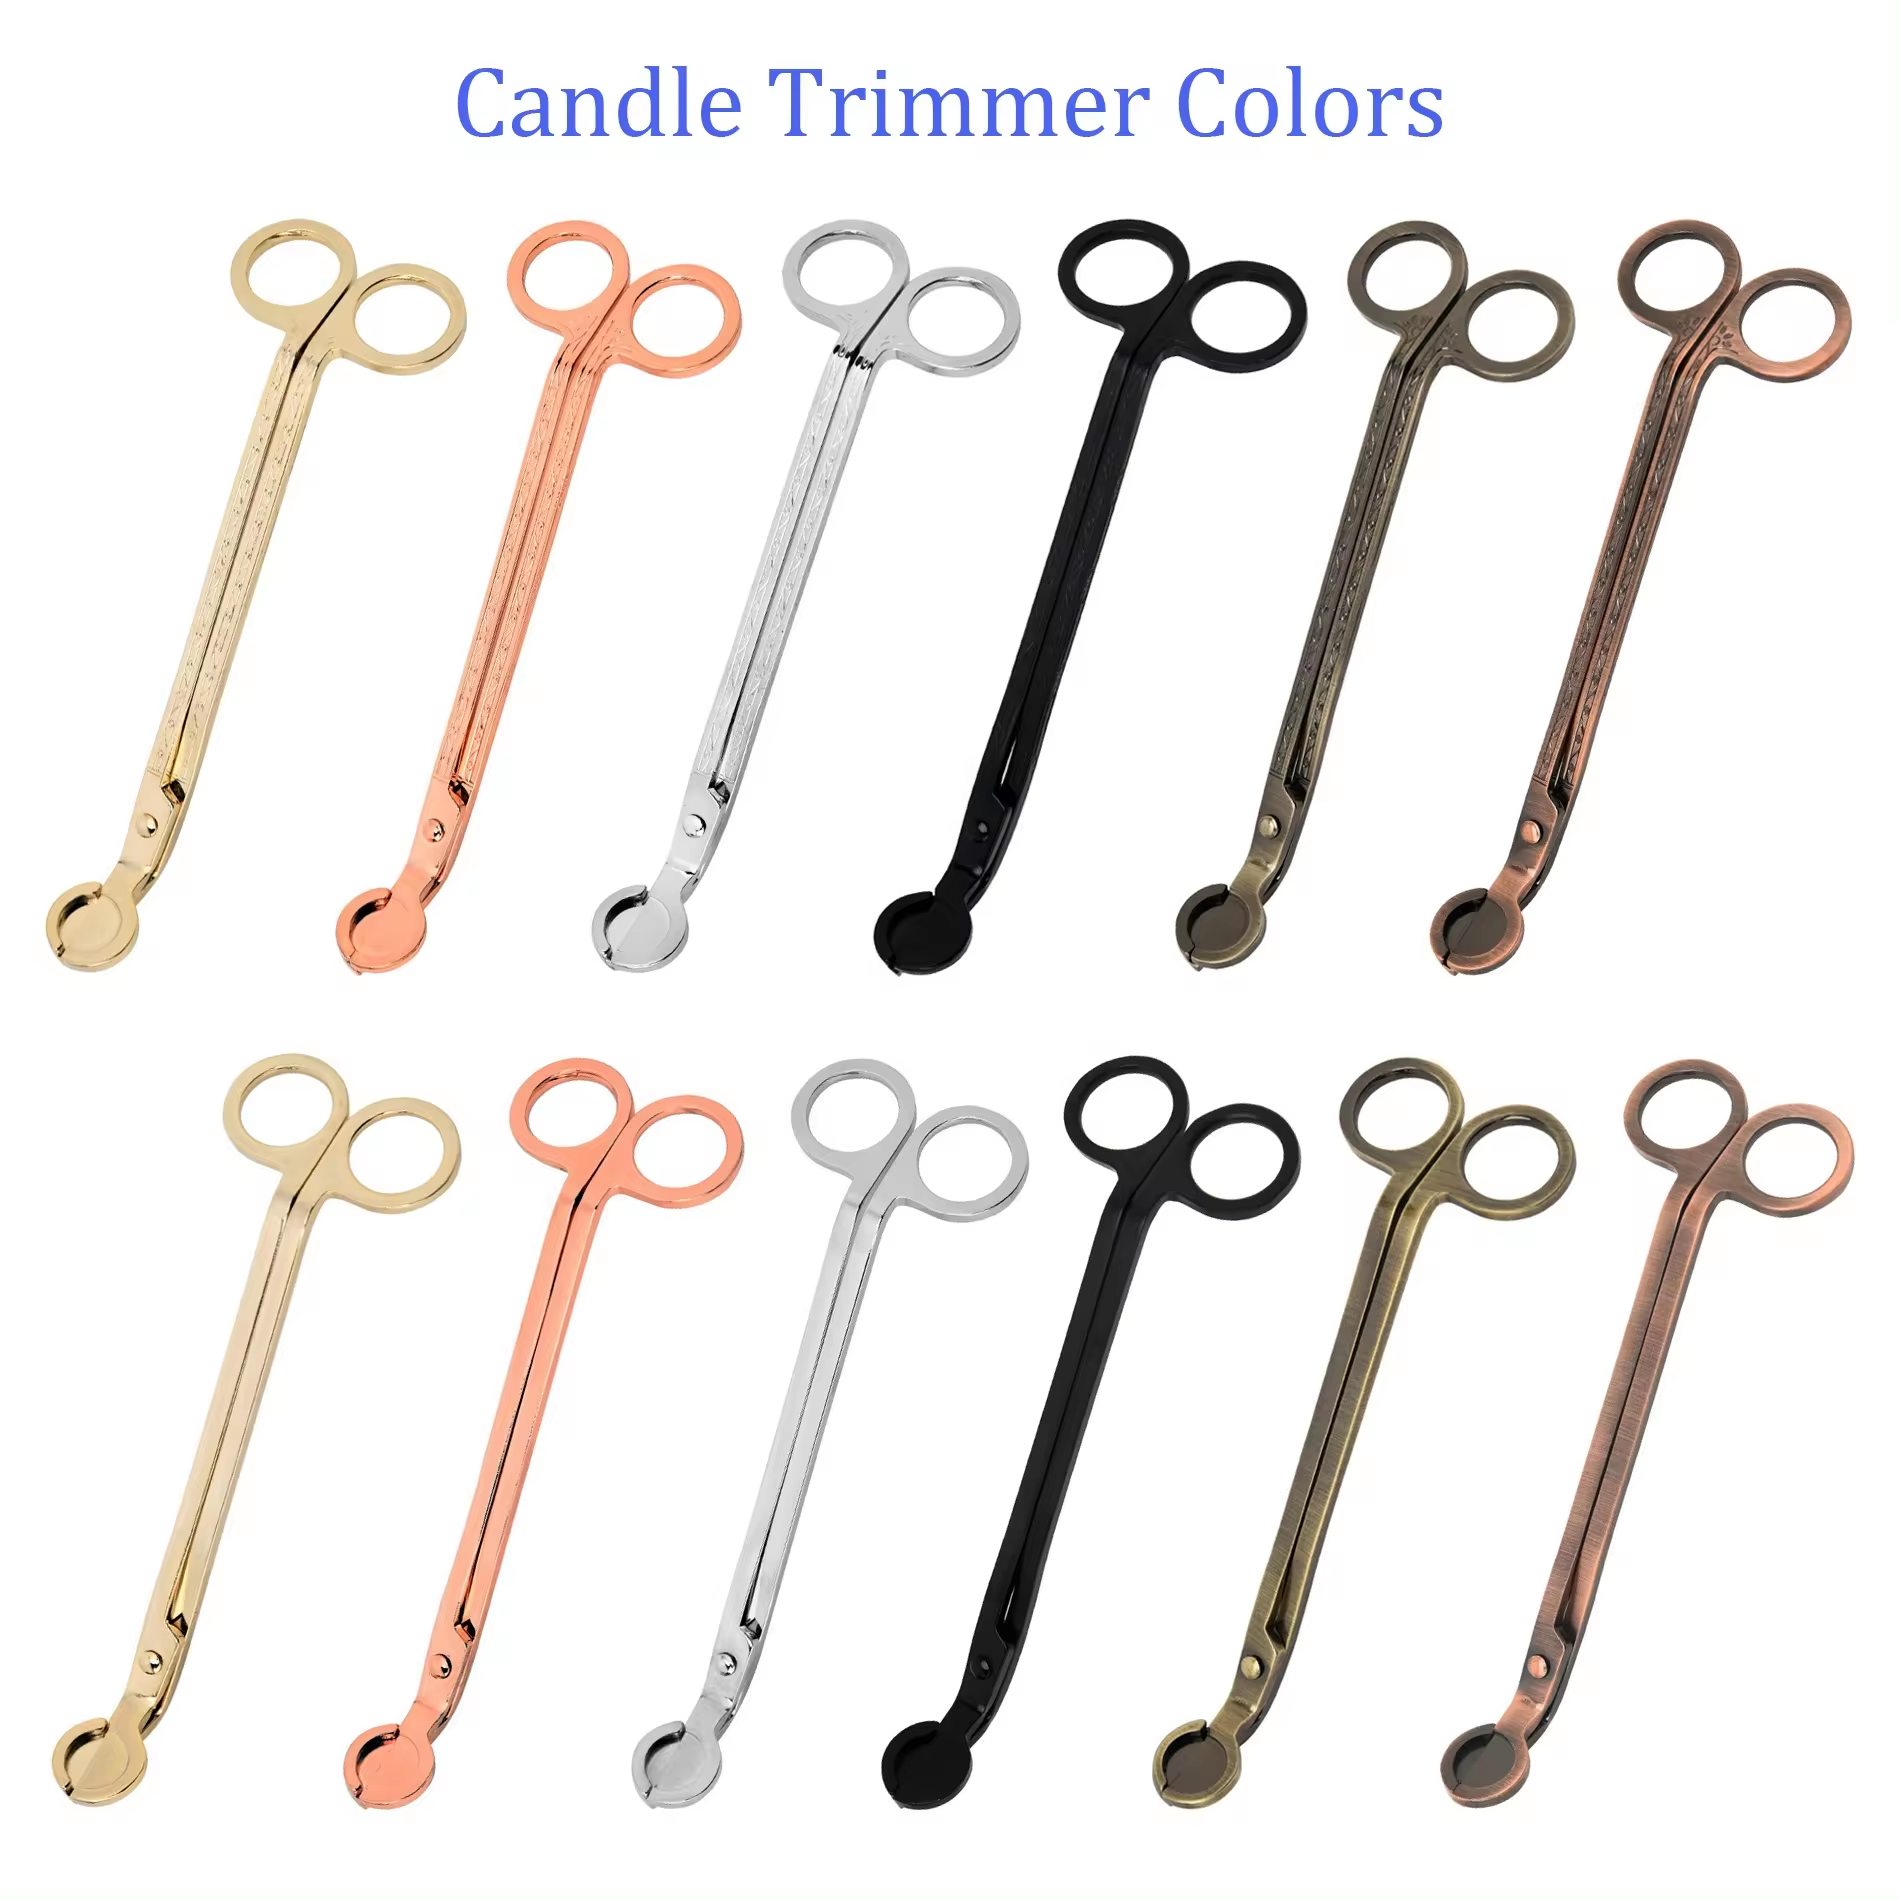 Fuxin Household’s Candle Wicks Trimmer: The Best Choice for Precision and Ease